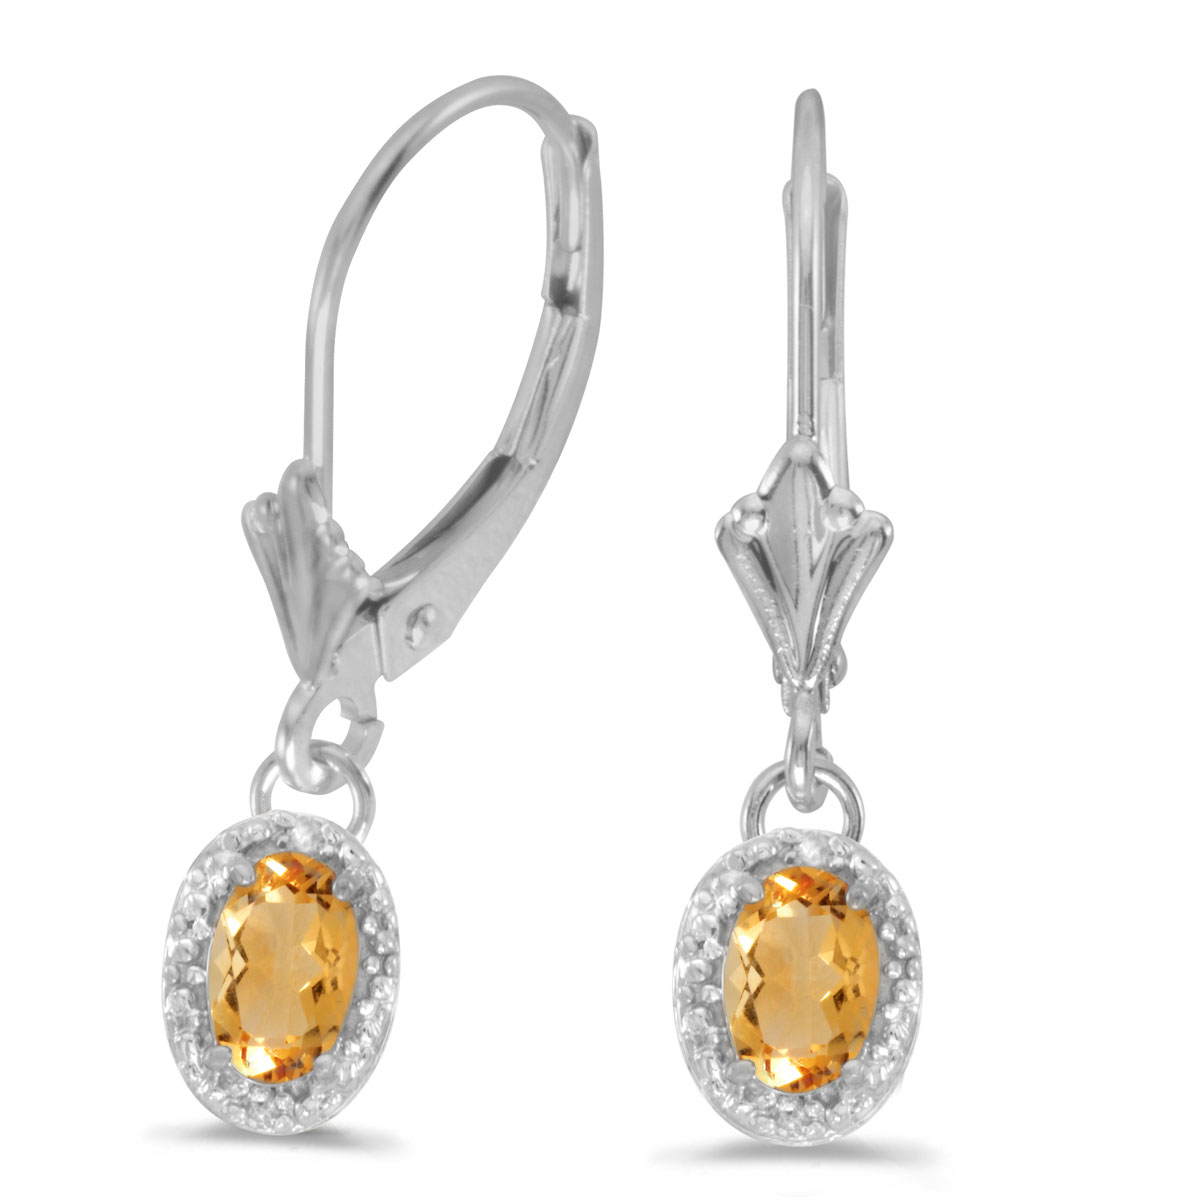 JCX2130: Beautiful 10k white gold leverback earrings with sunny 6x4 mm citrines complemented with bright diamonds.